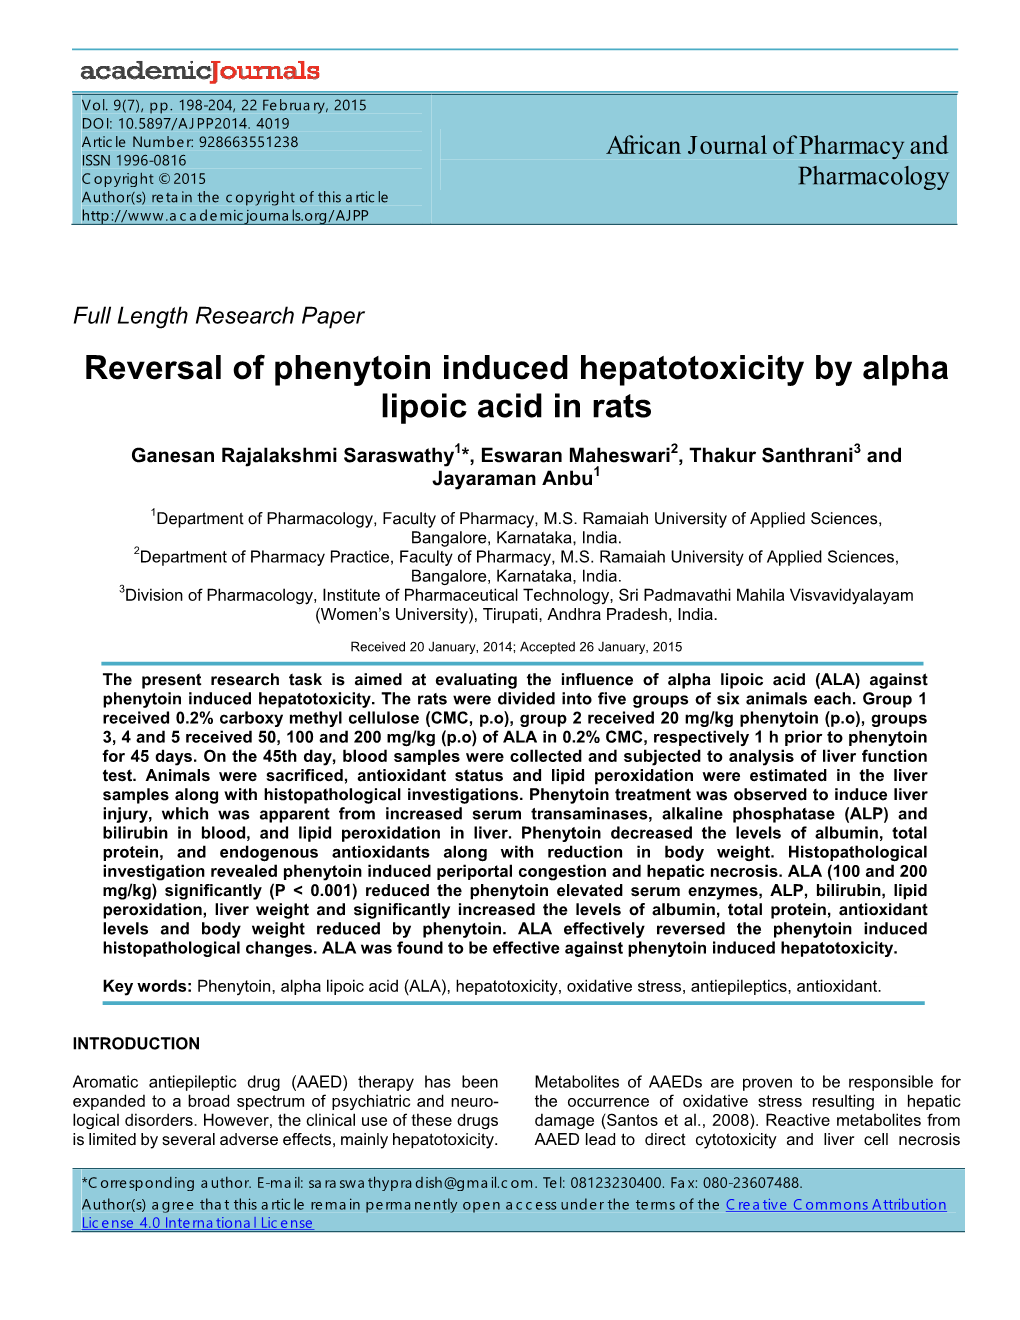 Reversal of Phenytoin Induced Hepatotoxicity by Alpha Lipoic Acid in Rats